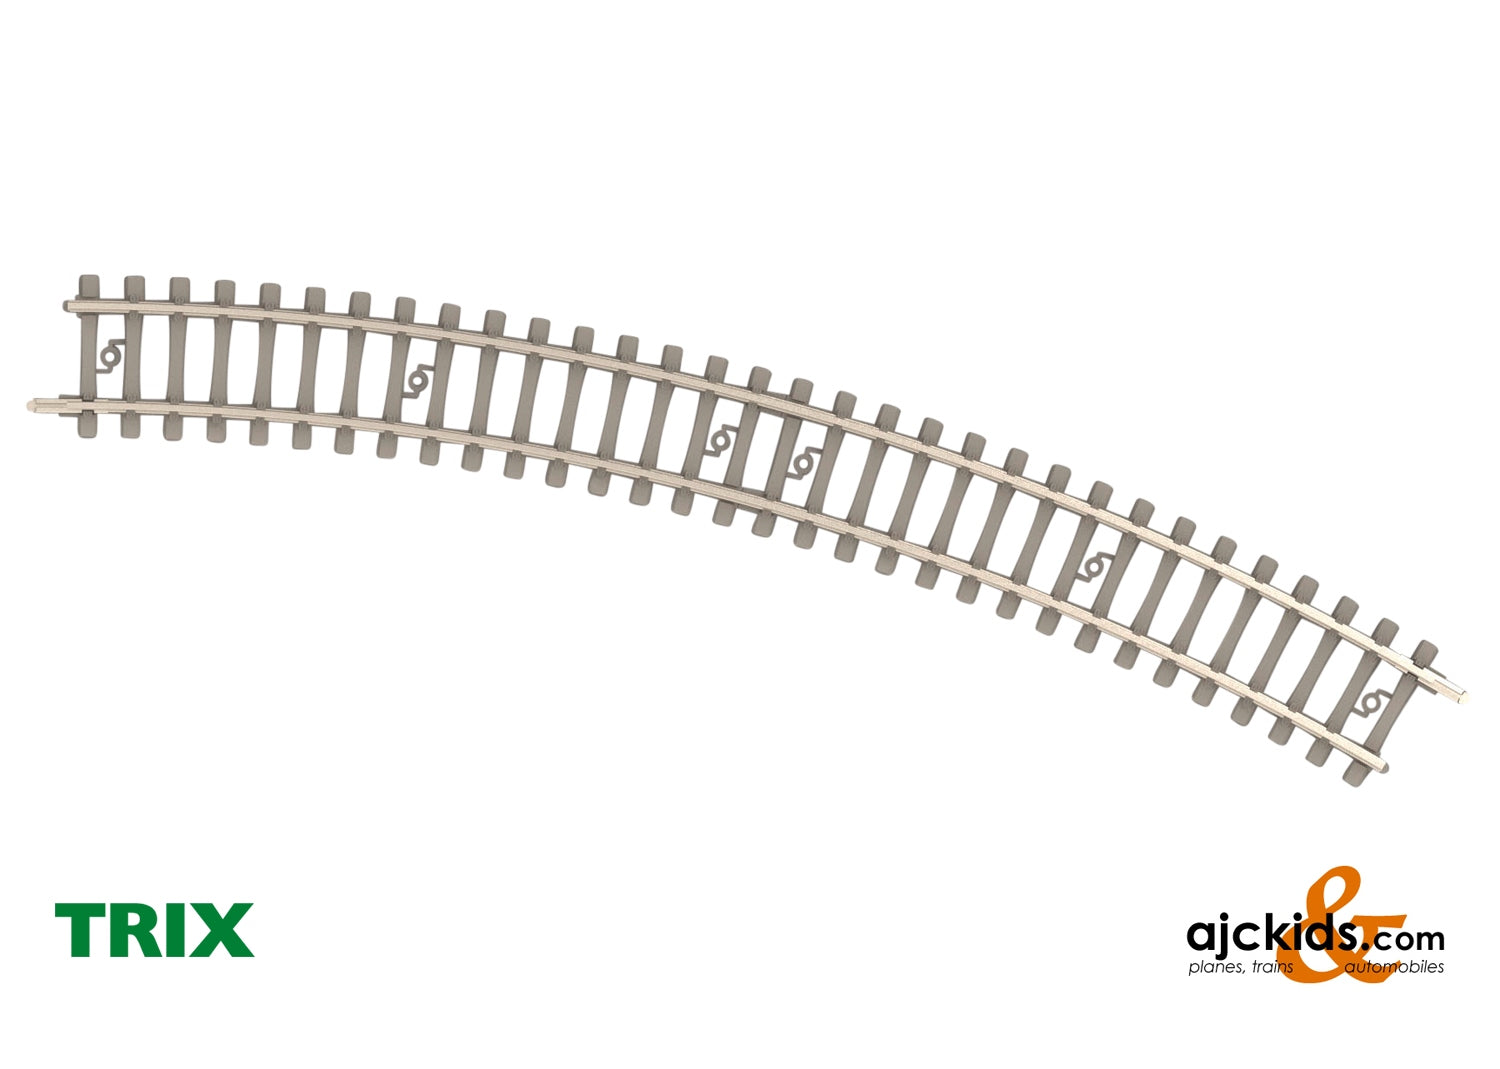 Trix 14510 - Curved Track with Concrete Ties